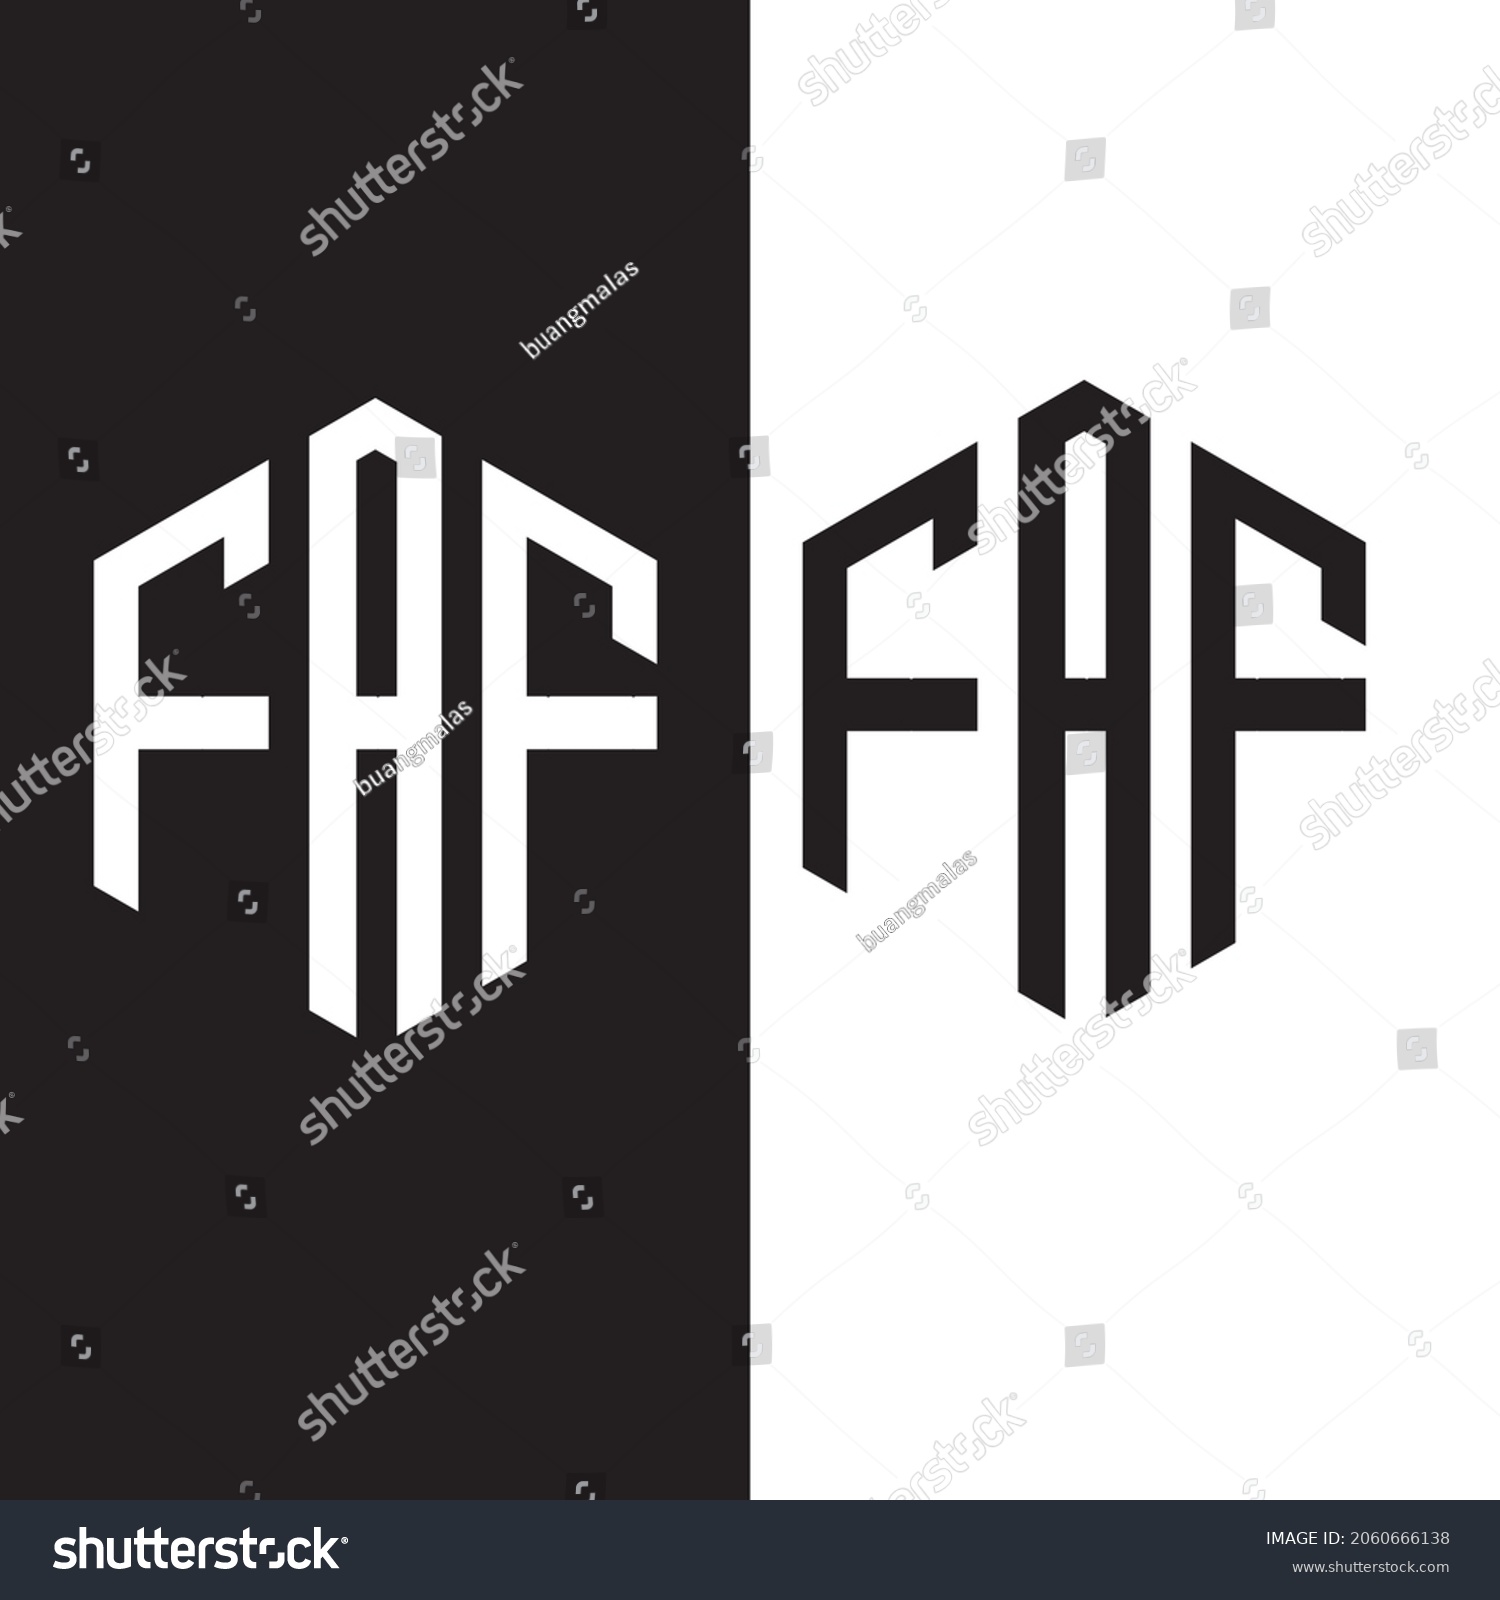 14 Faf icon Images, Stock Photos & Vectors | Shutterstock